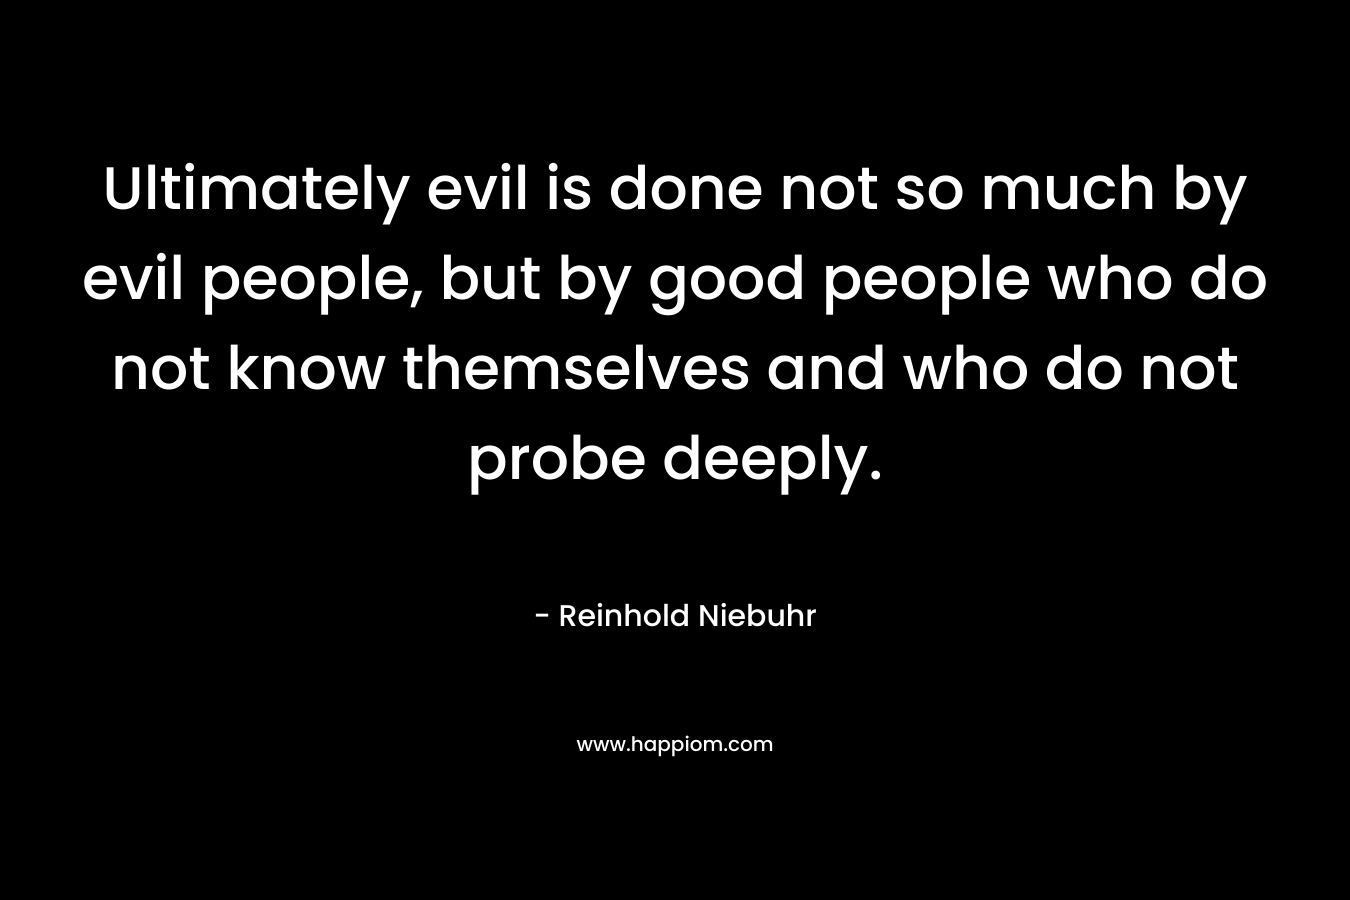 Ultimately evil is done not so much by evil people, but by good people who do not know themselves and who do not probe deeply. – Reinhold Niebuhr